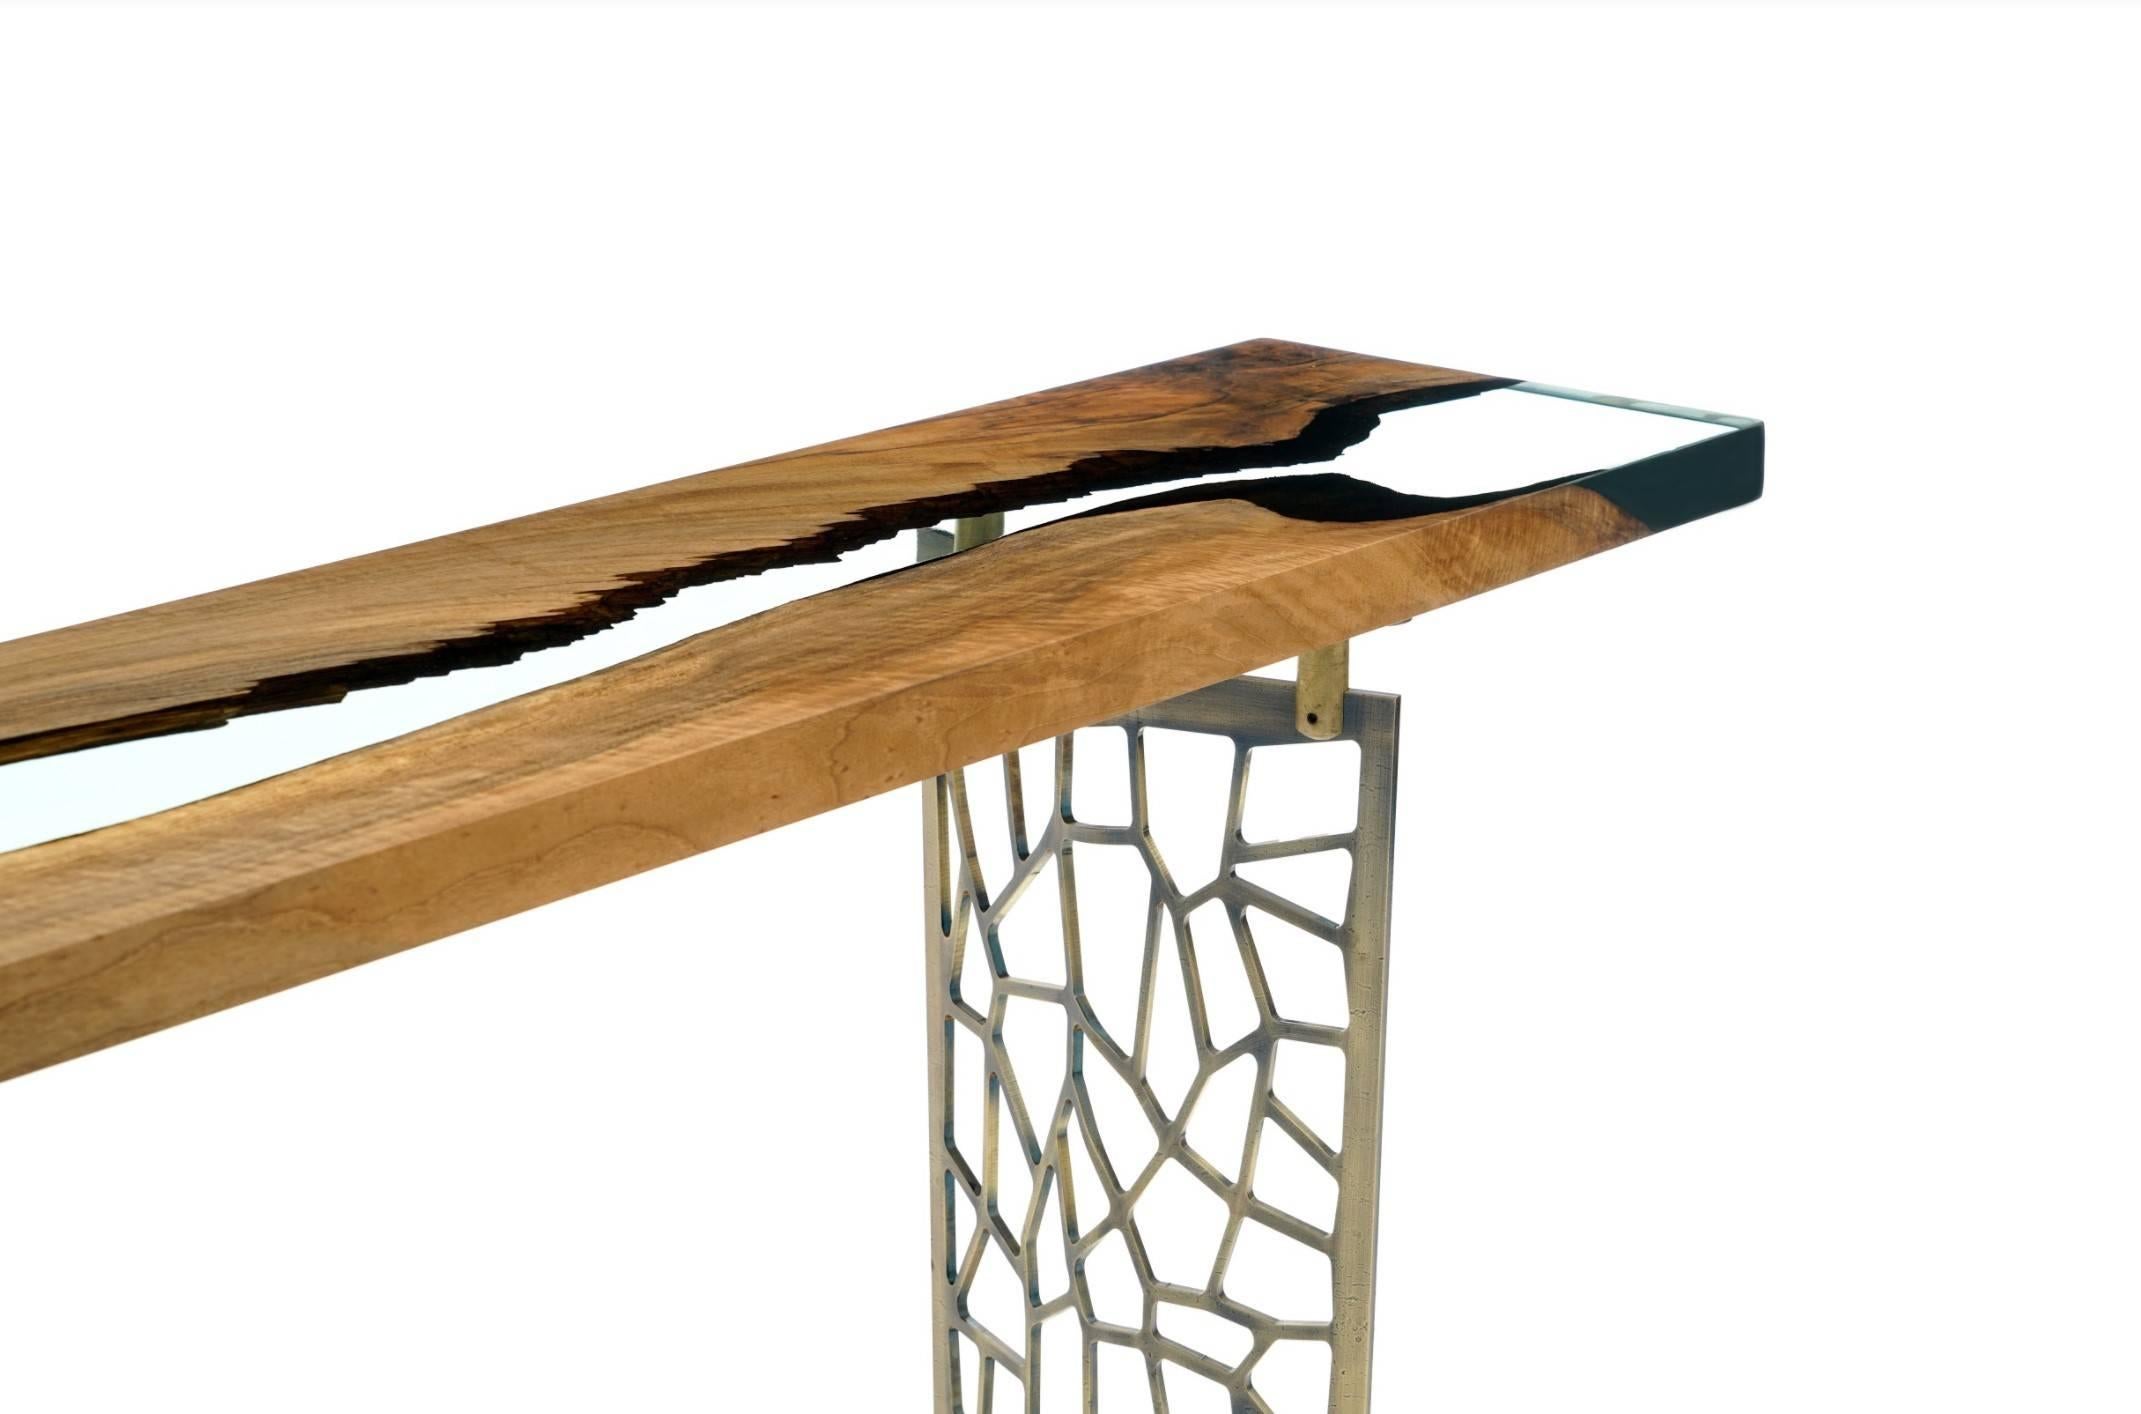 The ‘Hudson 200 Resin Console’ was made in Ankara, Turkey with walnut wood cut into straight edges. It is kilned and dried prior to being filled with high quality resin and placed on steel base. This particular piece is ideal for entryways!